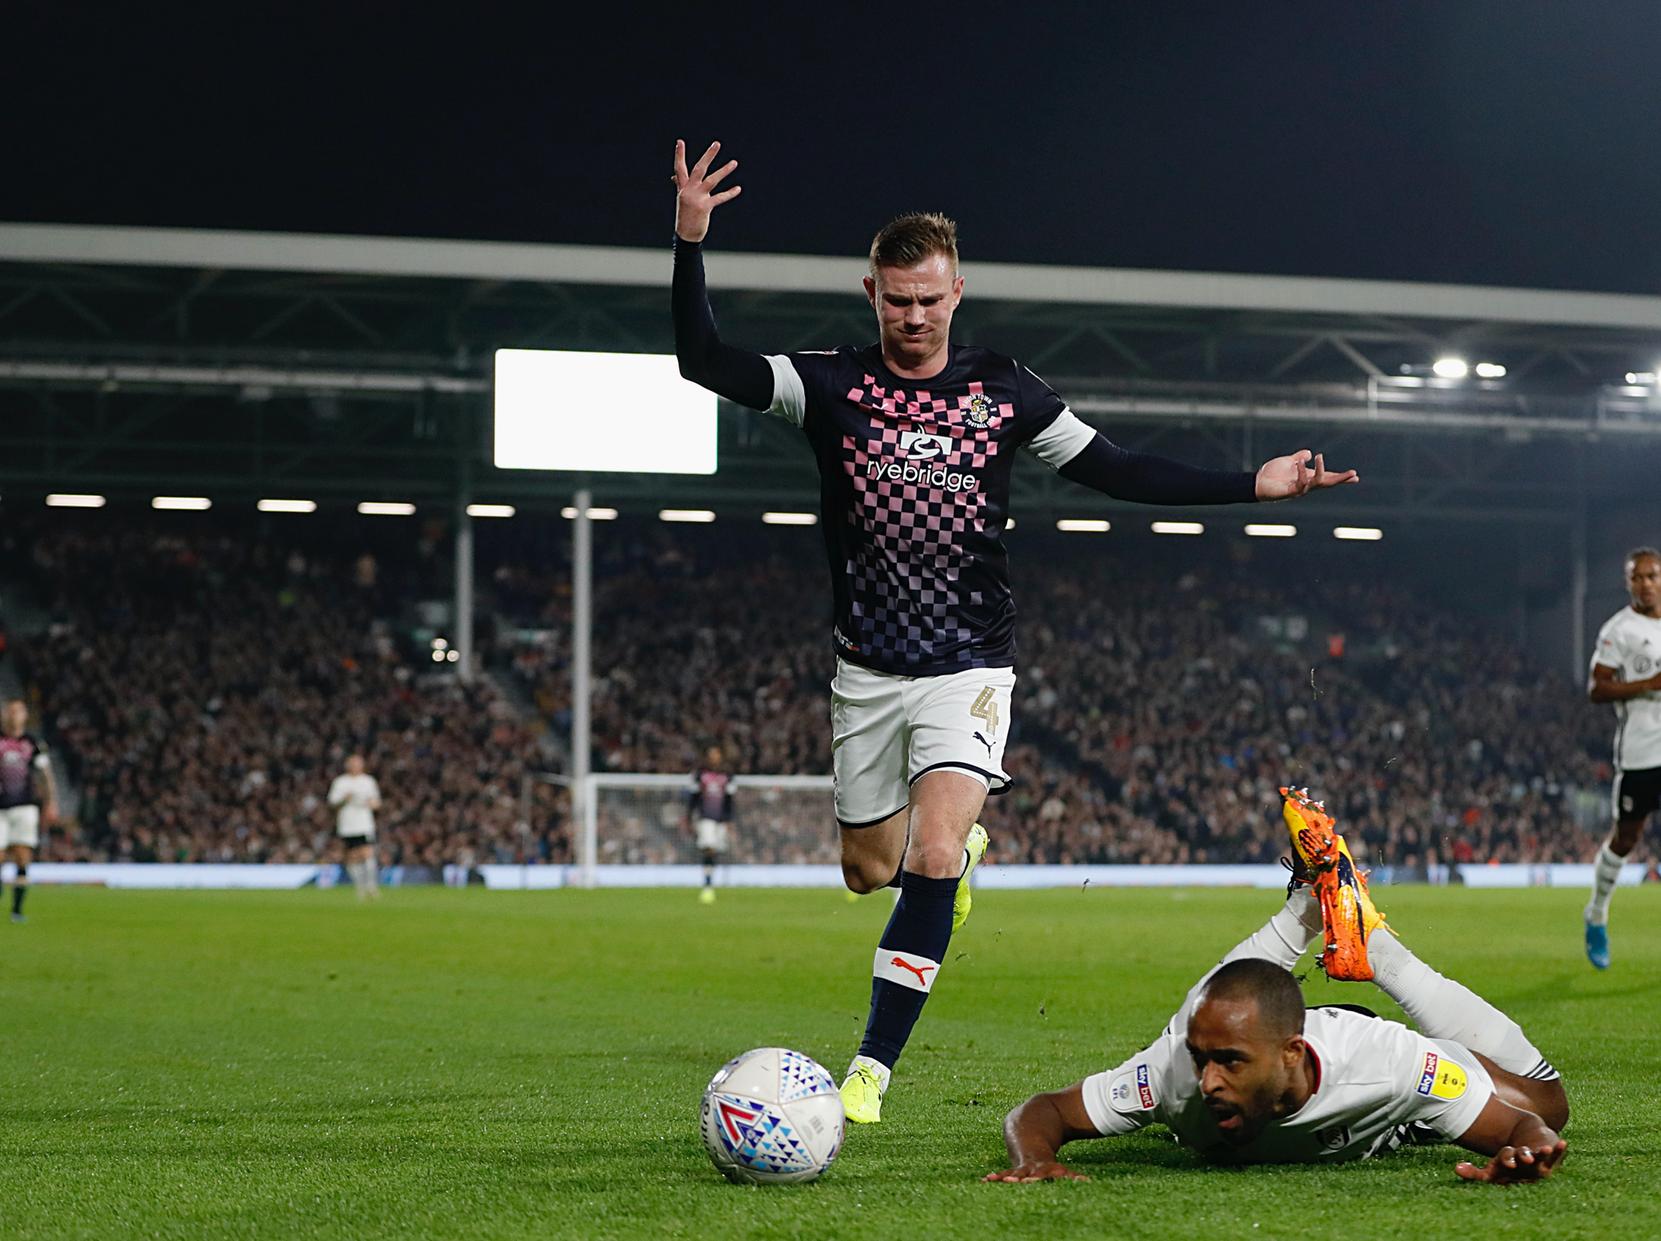 Back on his old stomping ground, it was always going to be tough going up against a high-class home midfield. Was made to pay for an unnecessary foul, as the free kick led to Fulham's crucial third goal.